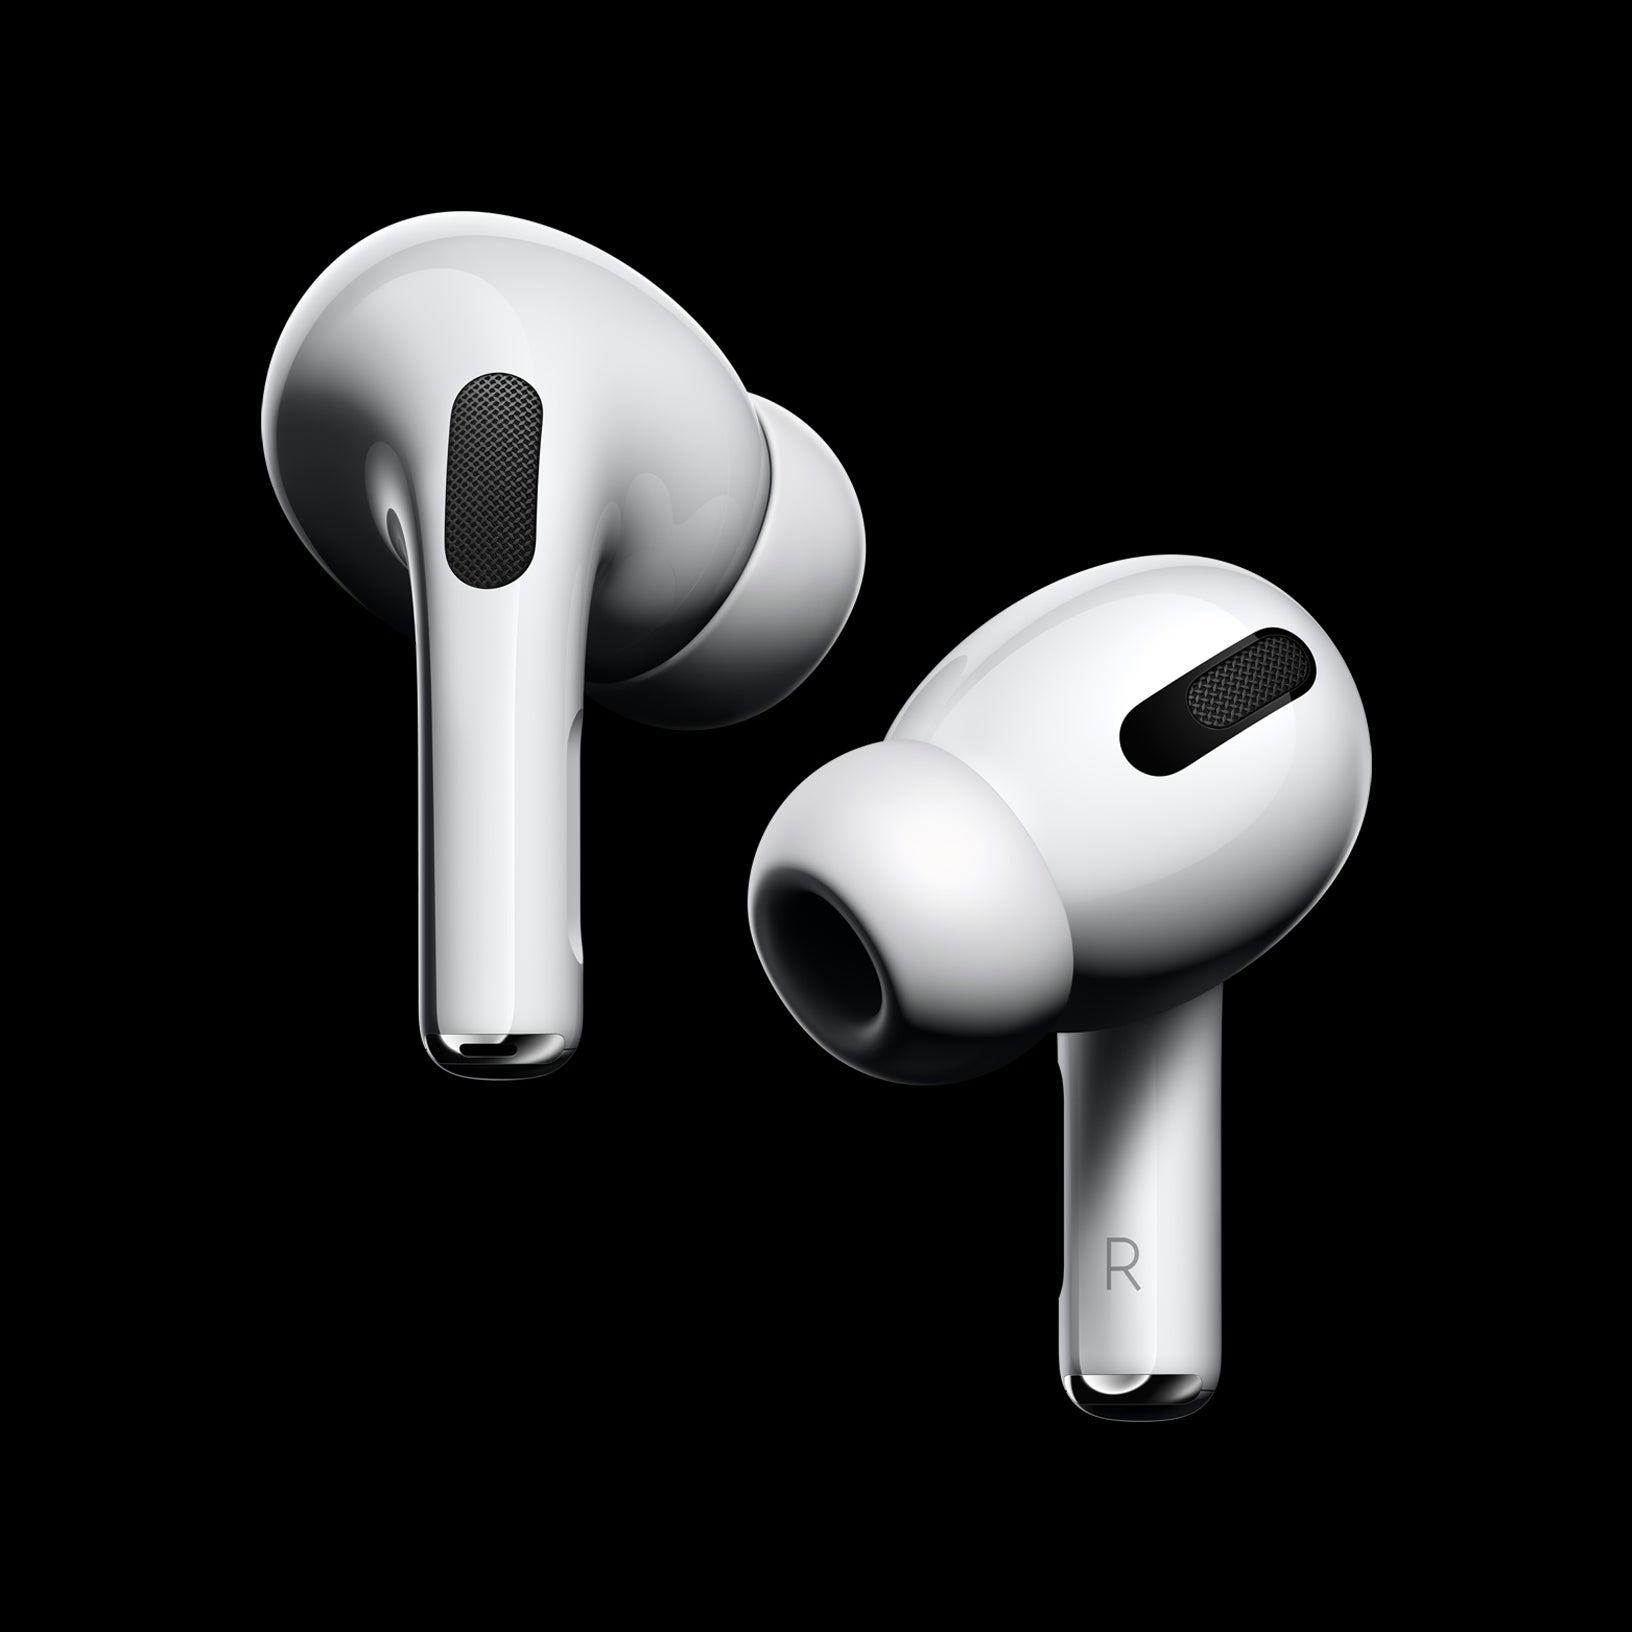 The AirPods 3 could resemble the AirPods Pro with its shorter stem - AirPods 3 to be unveiled Monday says analyst; expect to see a shorter stem and hear improved audio